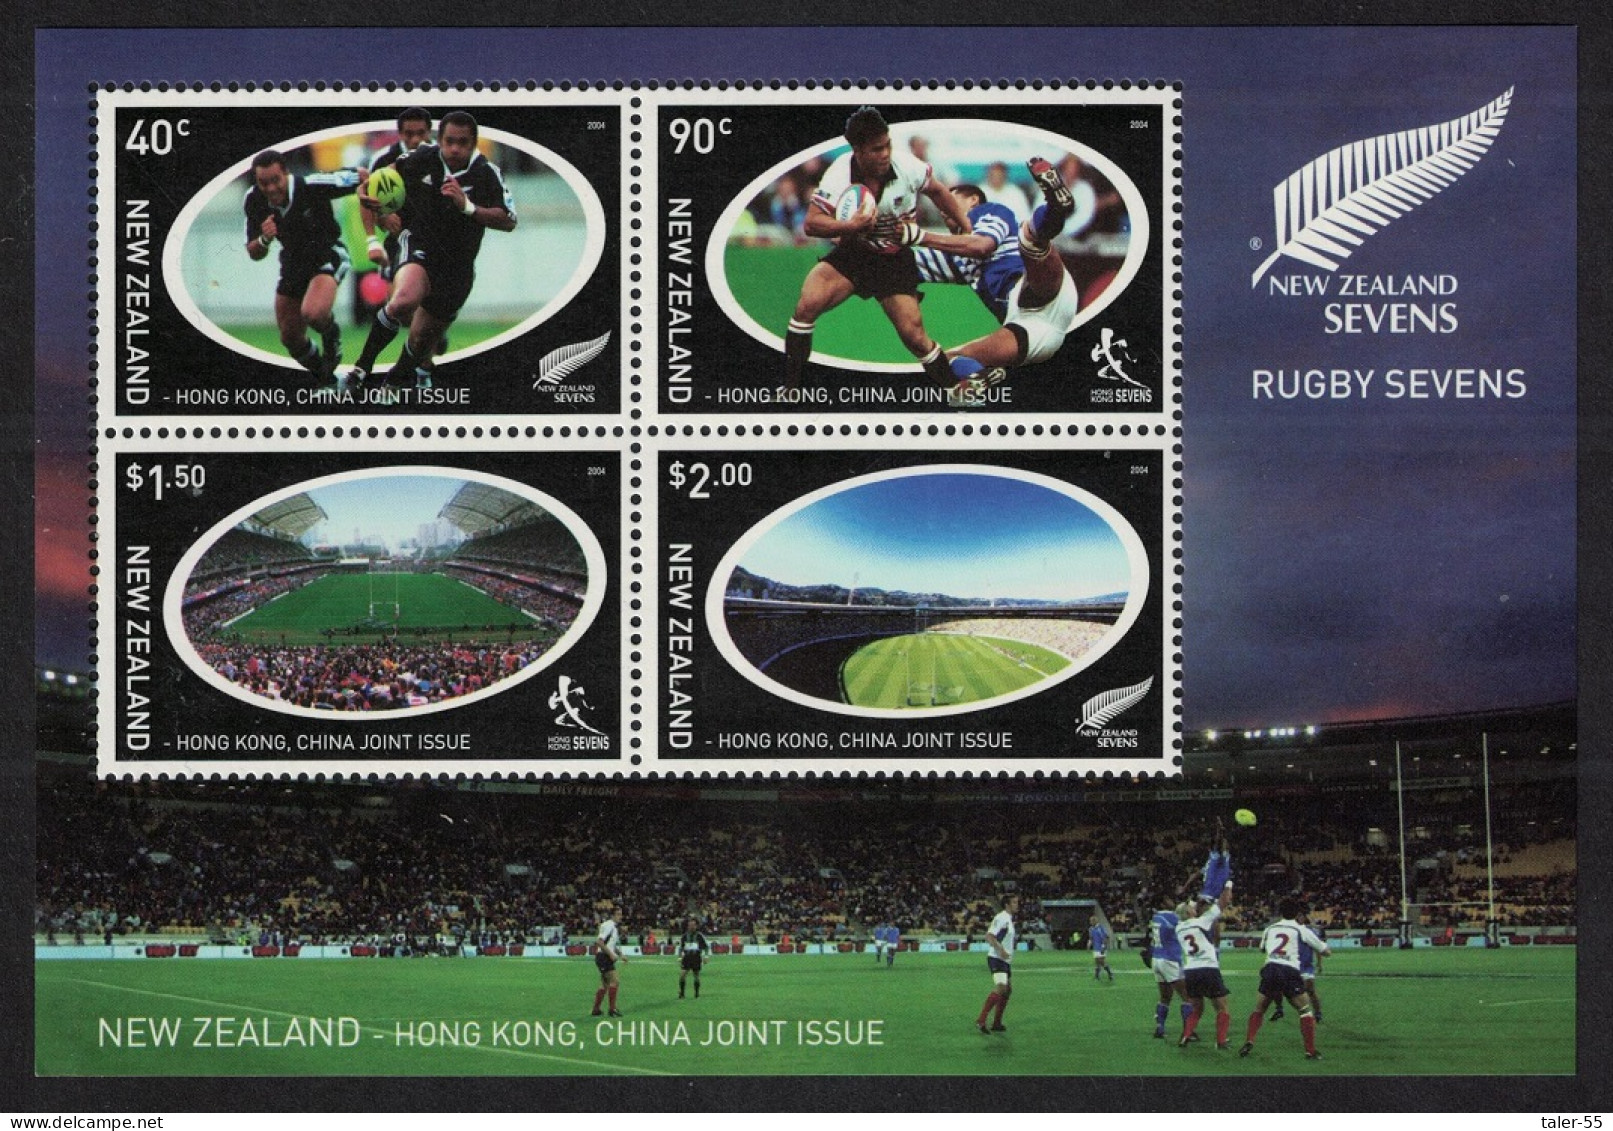 New Zealand Rugby Sevens MS 2004 MNH SG#MS2677 - Unused Stamps